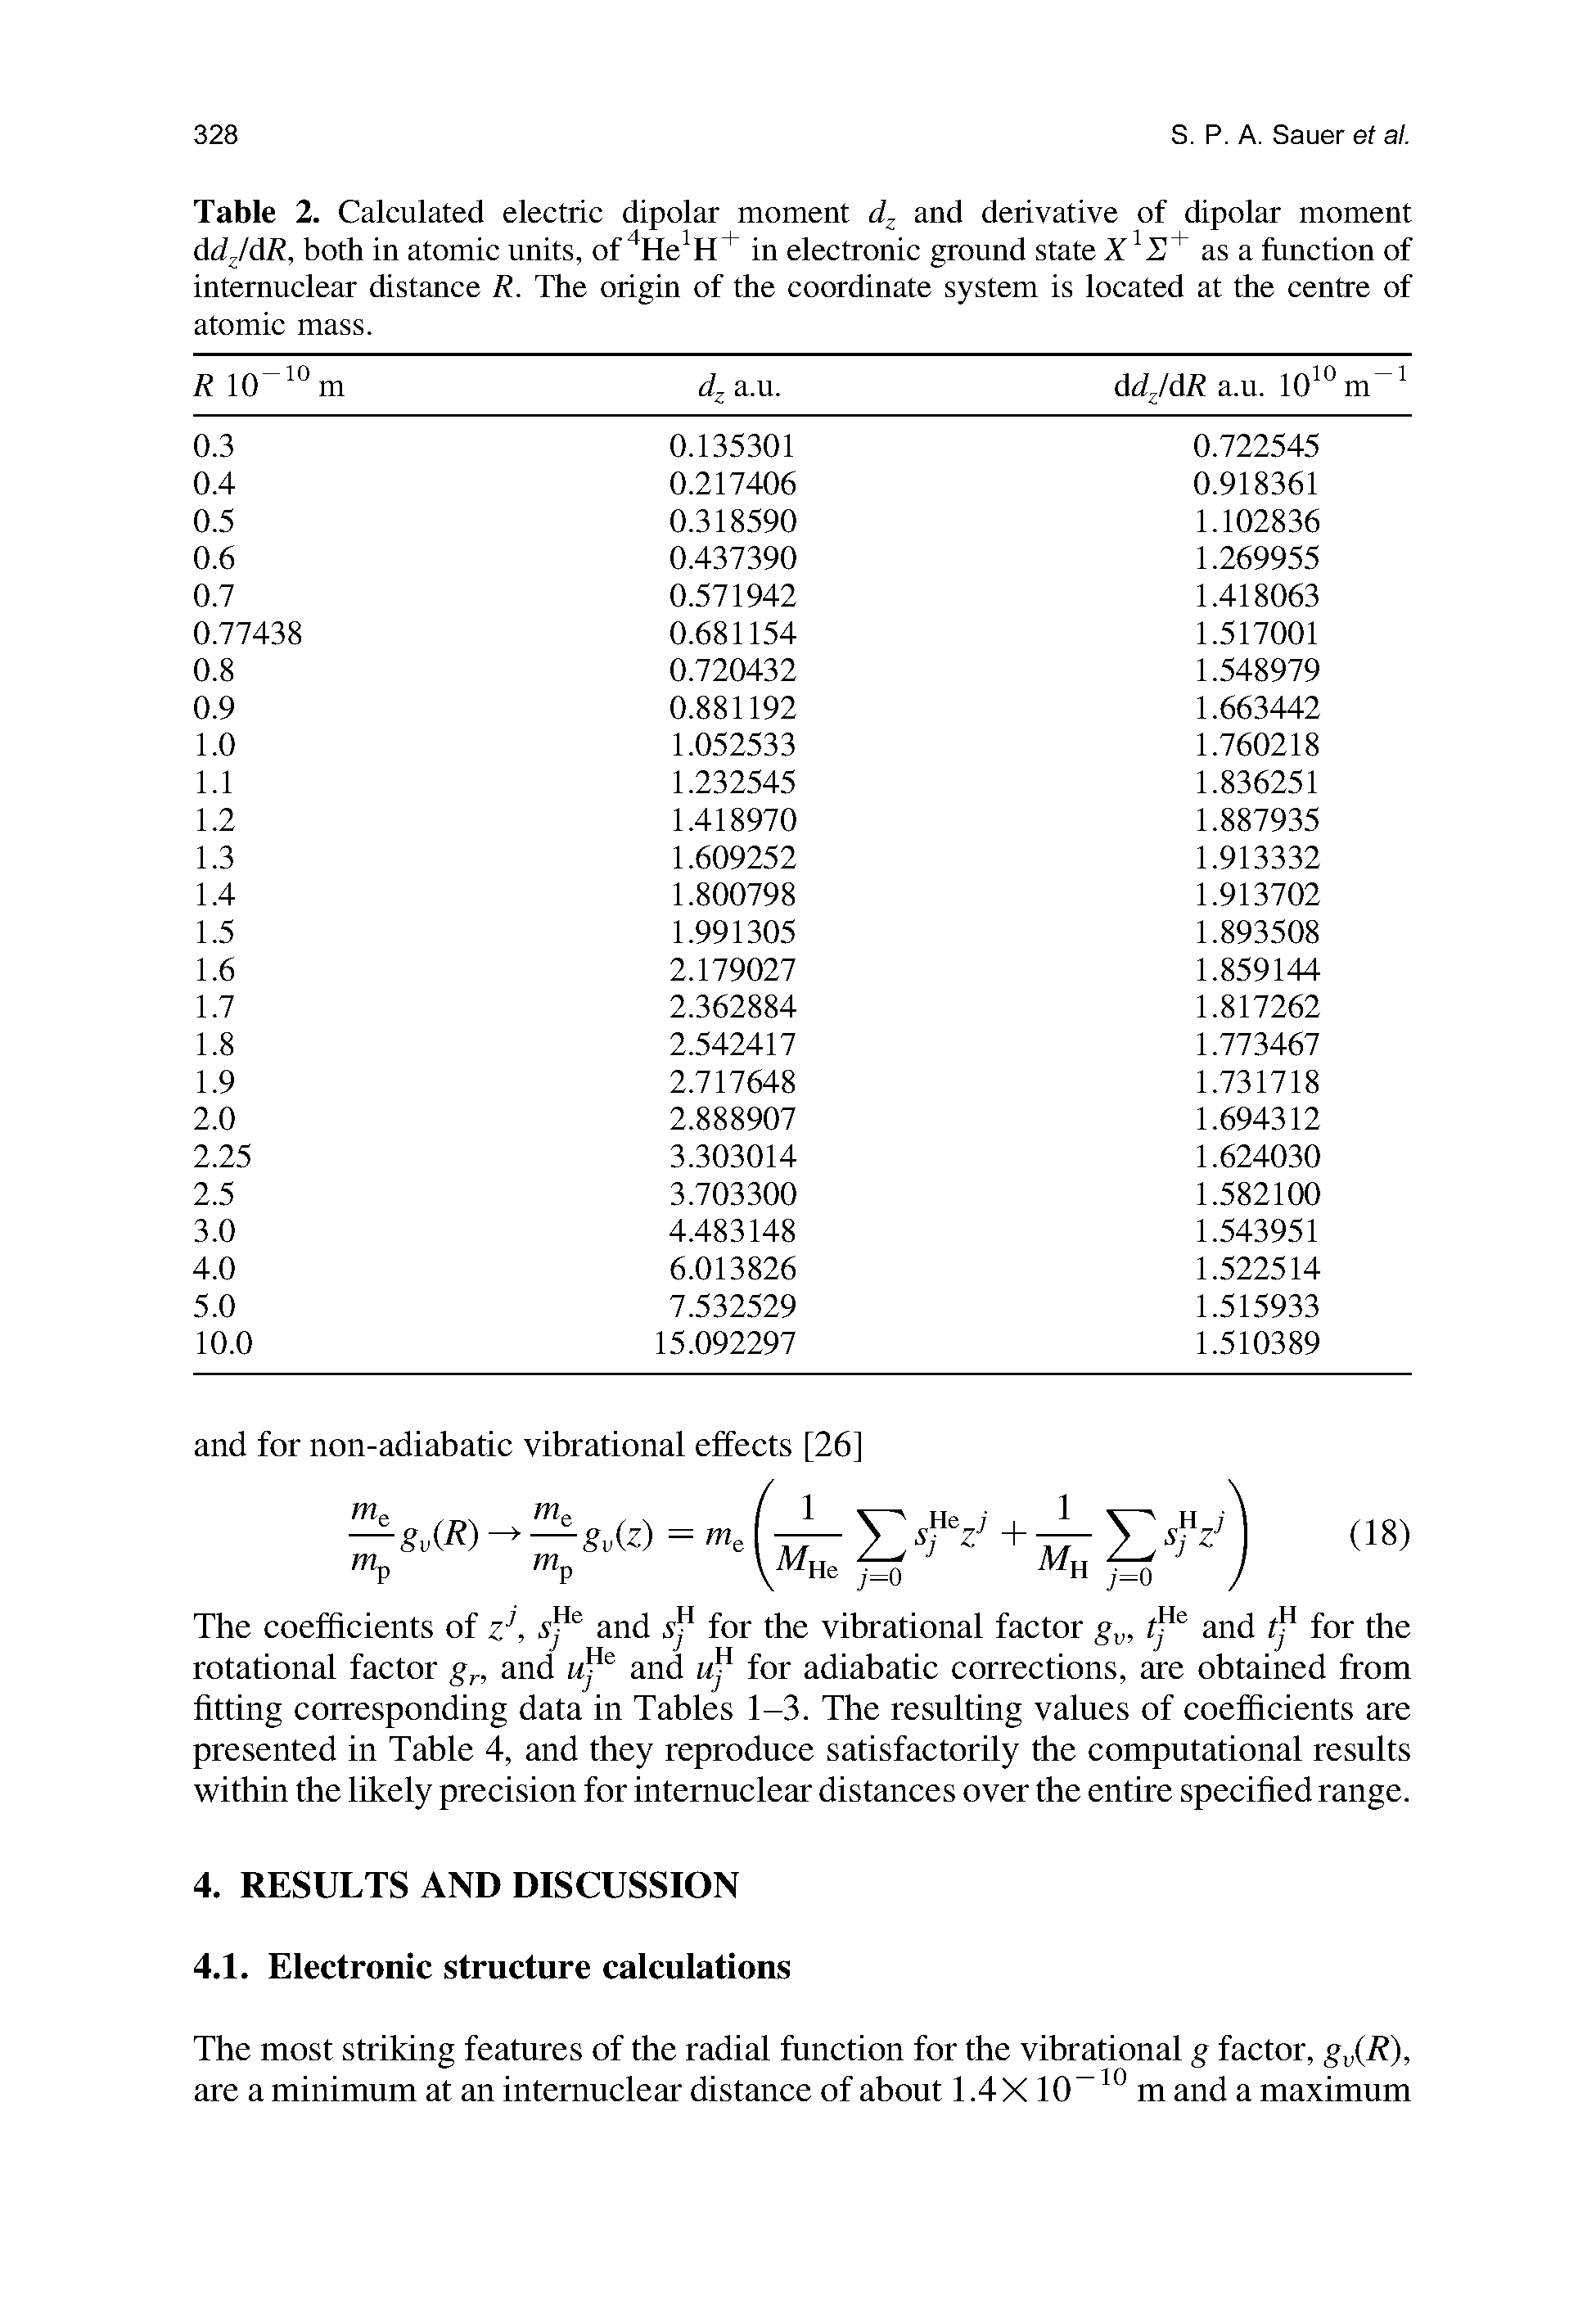 Table 2. Calculated electric dipolar moment and derivative of dipolar moment ddJdR, both in atomic units, of in electronic ground state as a function of...